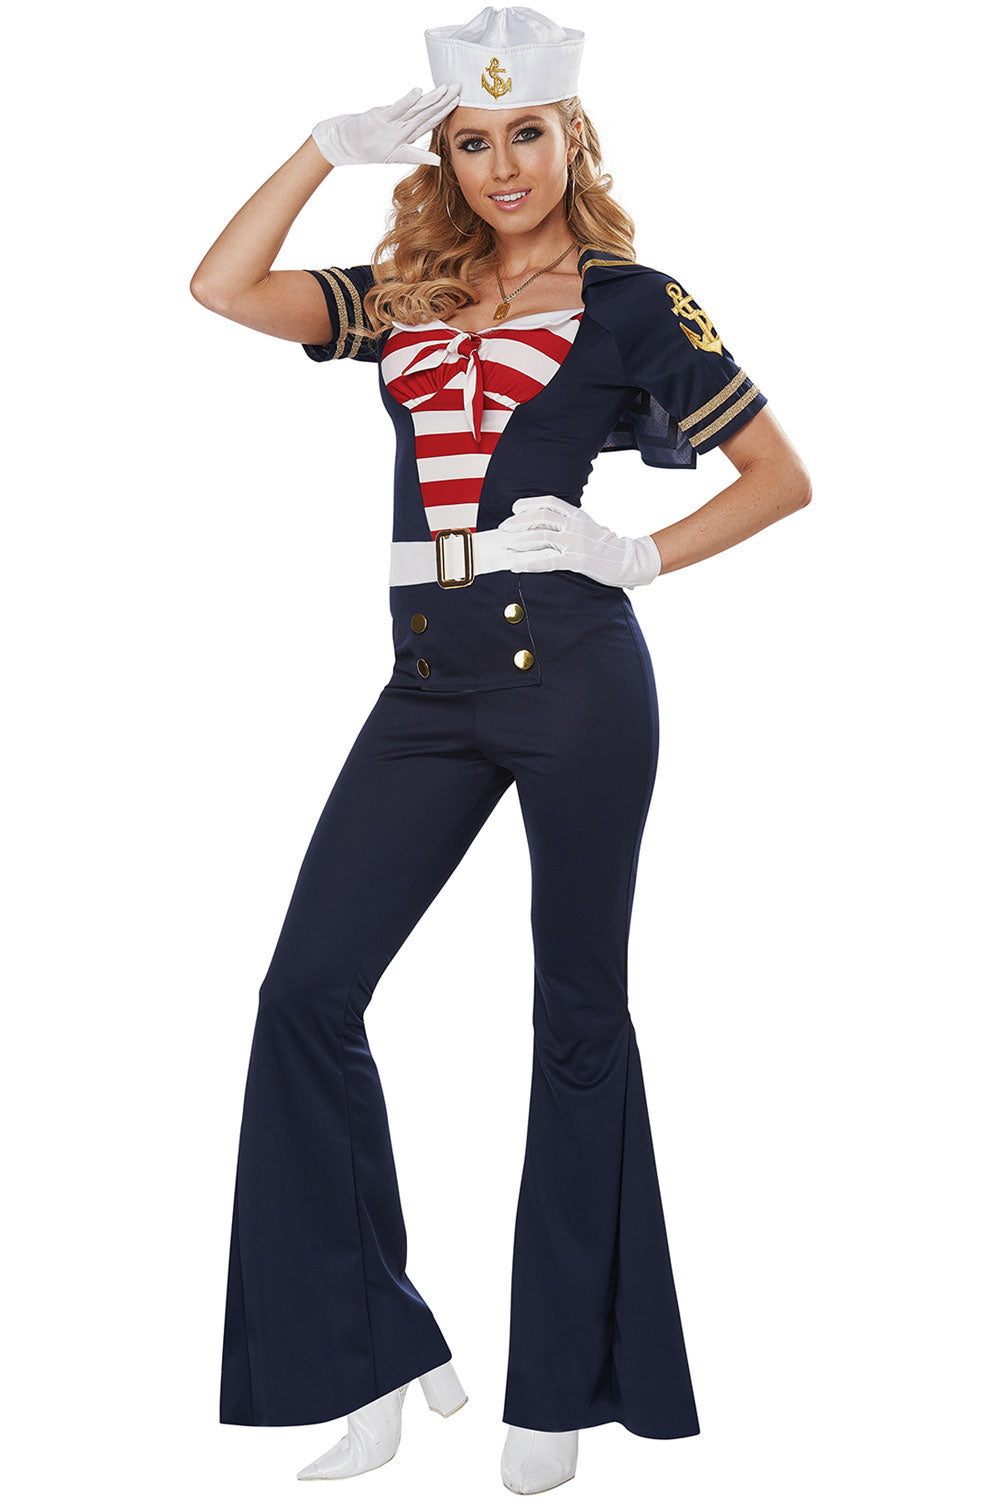 All Hands On Deck / Adult California Costume 5020/012